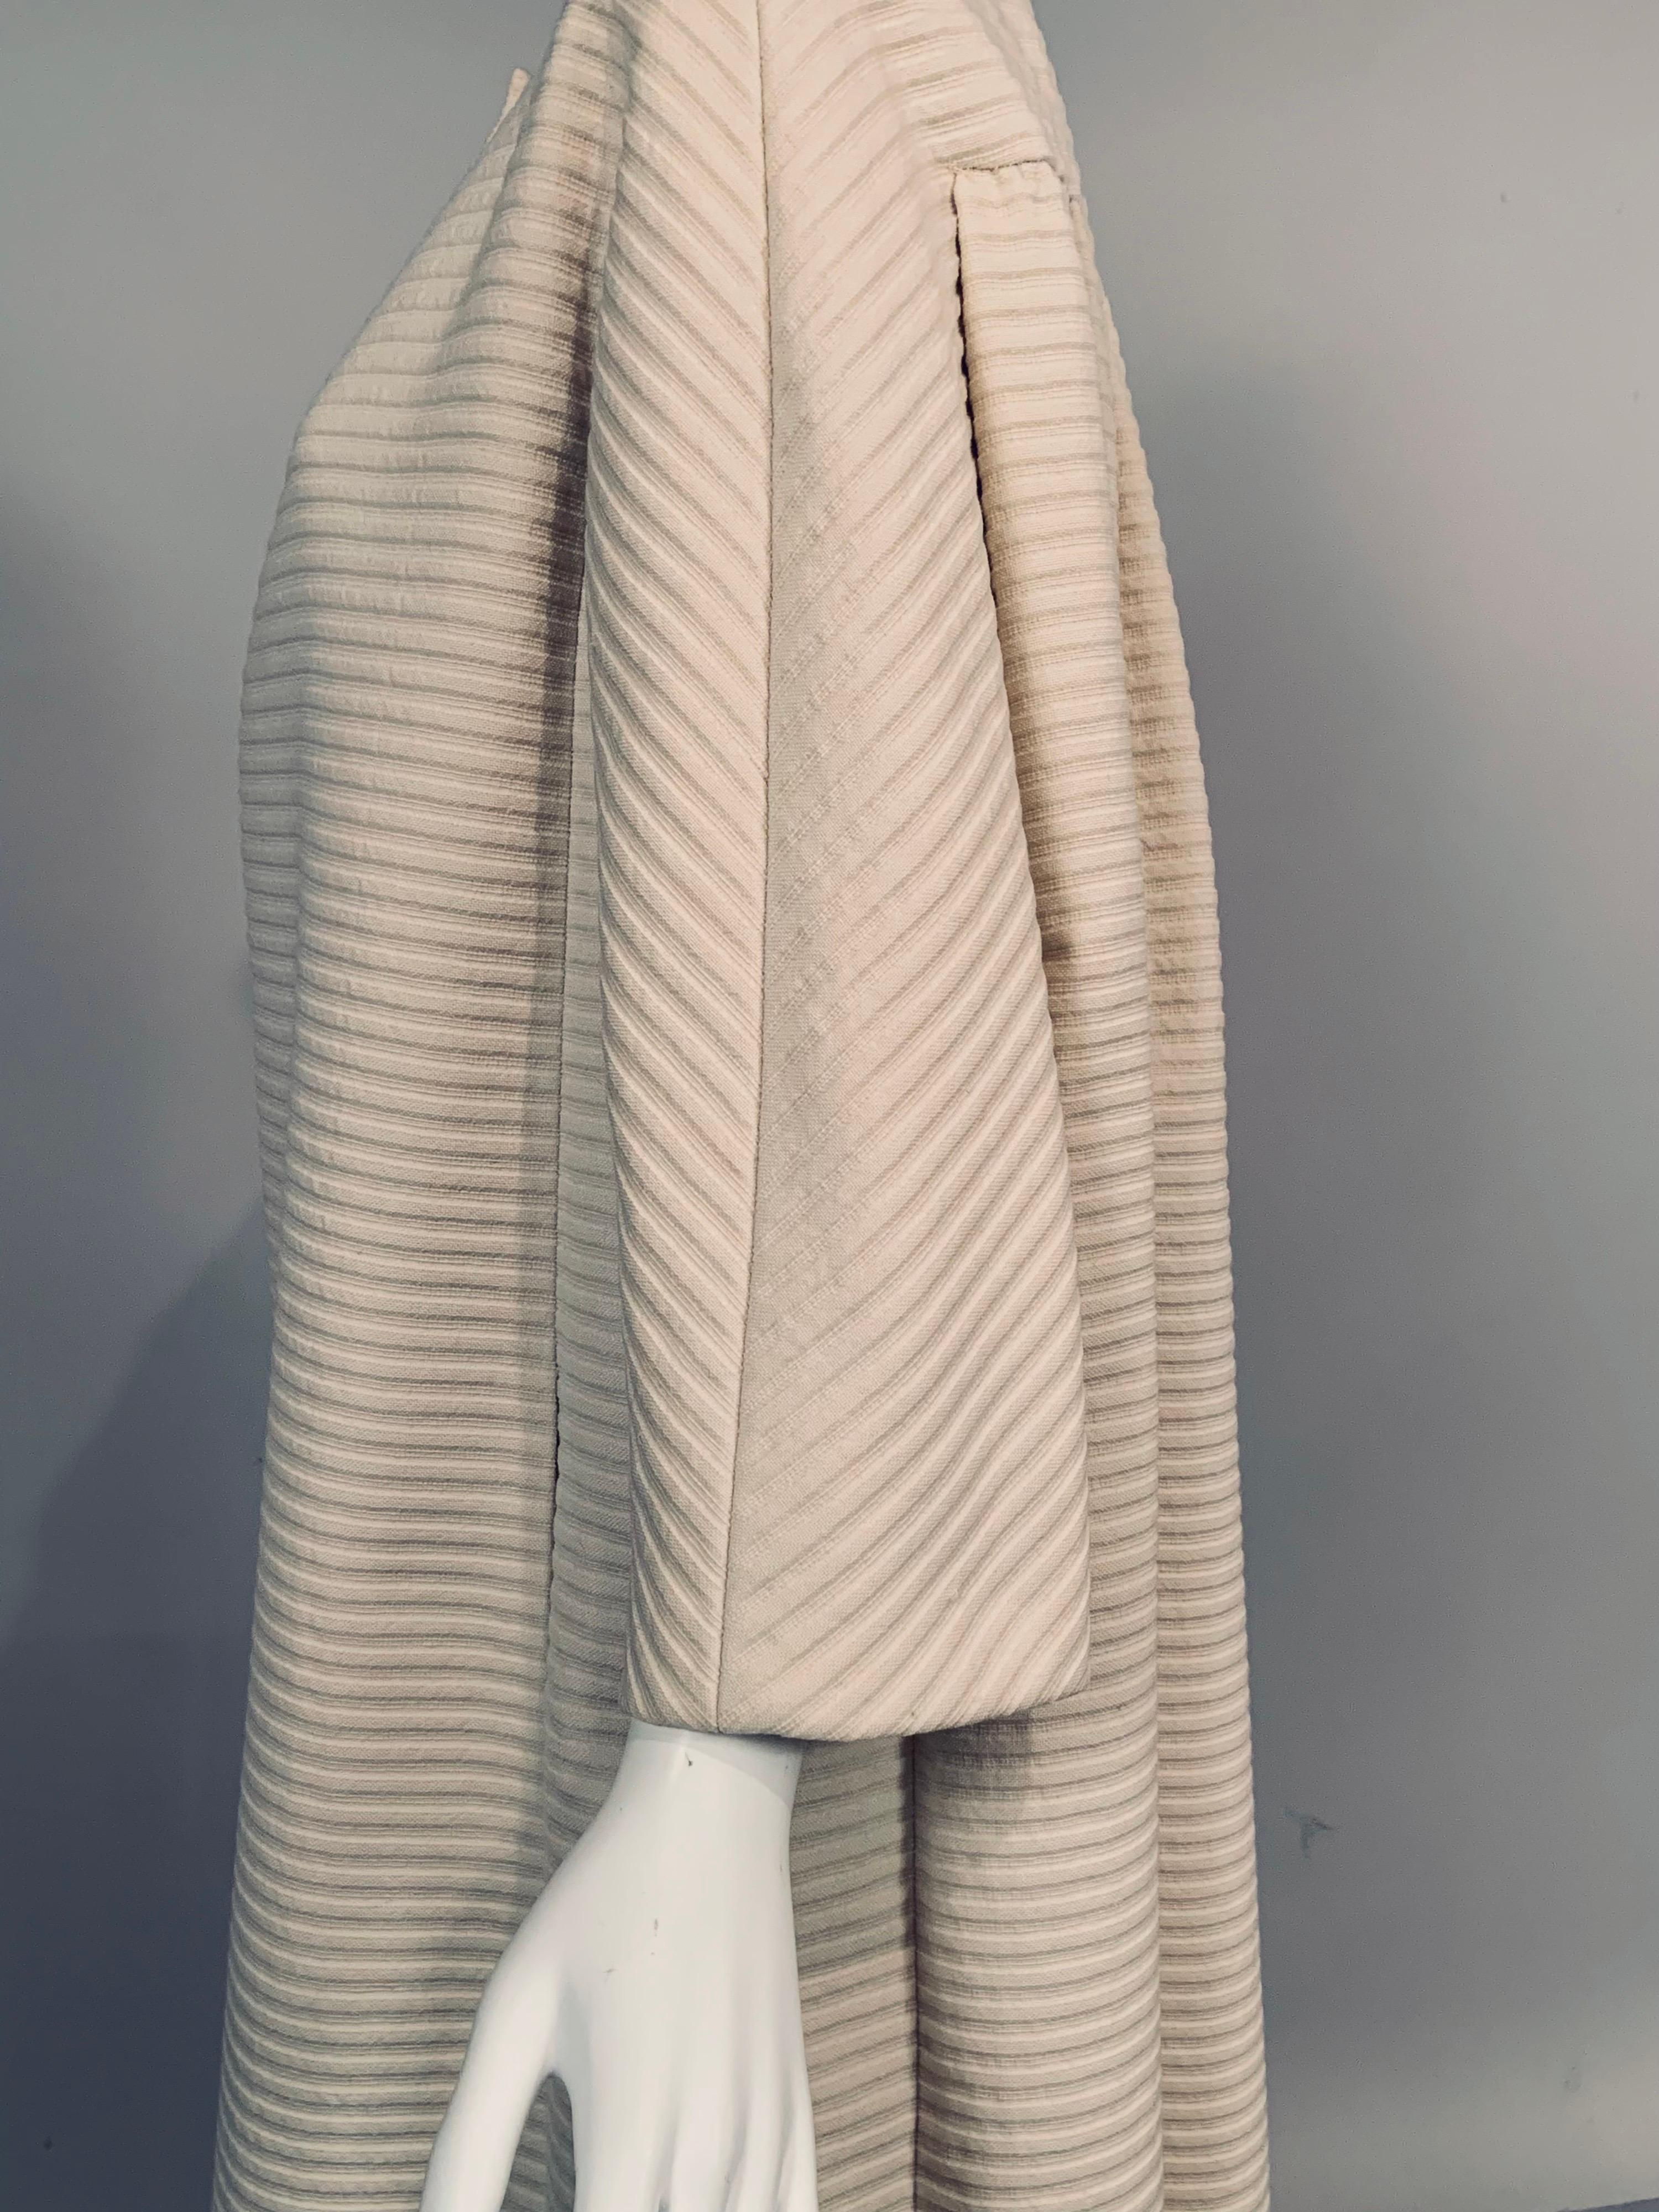 Monte-Sano & Pruzan Ivory Wool Ottoman Long Evening Coat  Saks Fifth Avenue In Excellent Condition For Sale In New Hope, PA